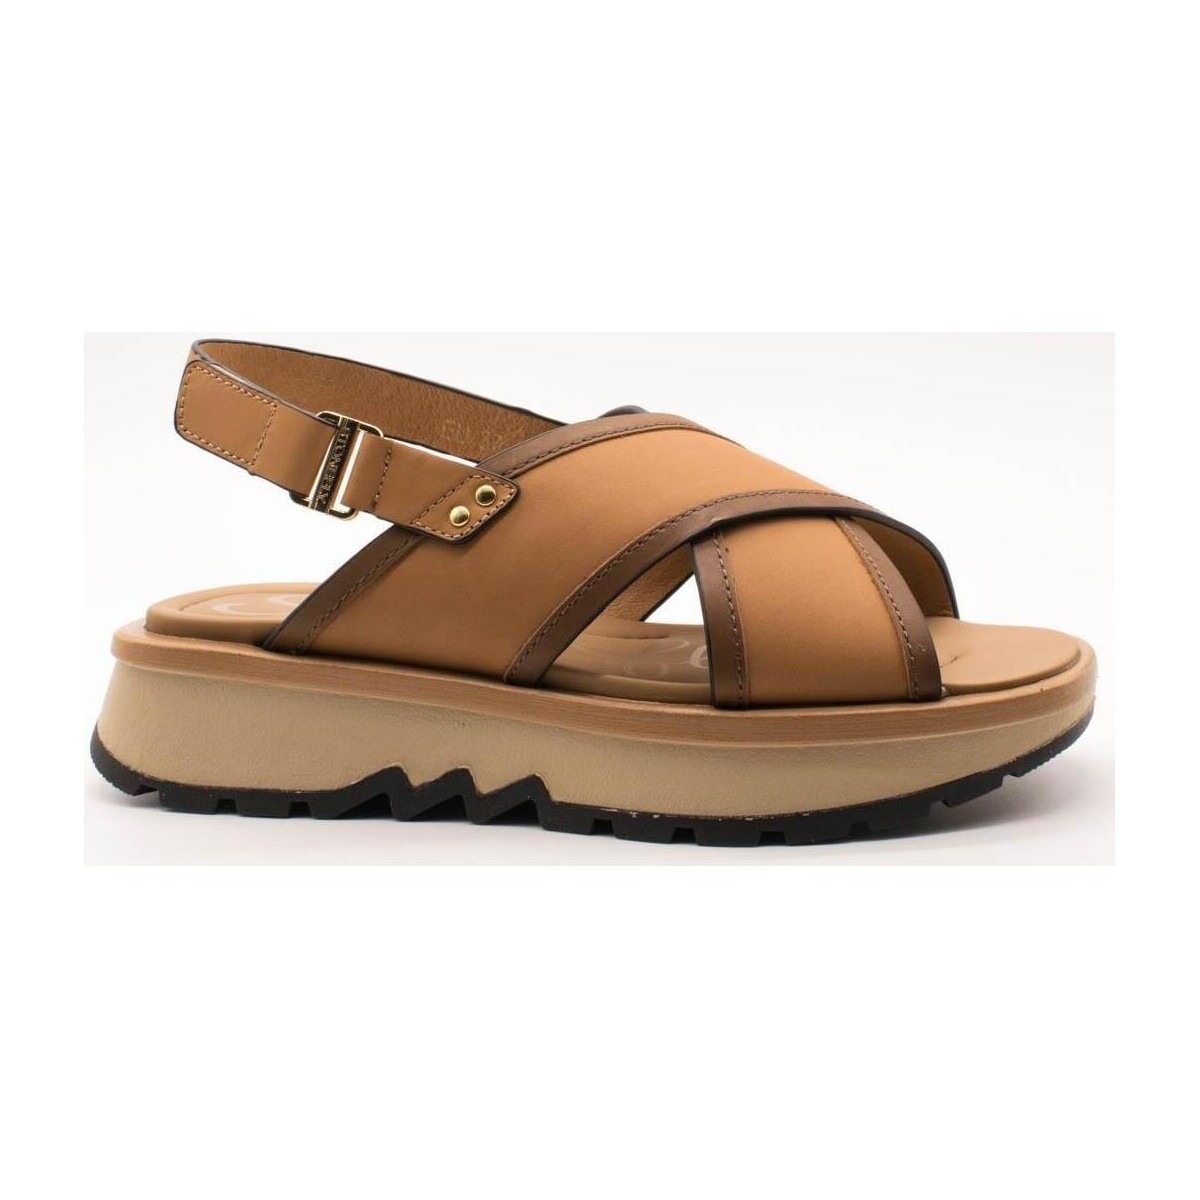 Spartoo Brown Sandals for Woman by Stonefly GOOFASH